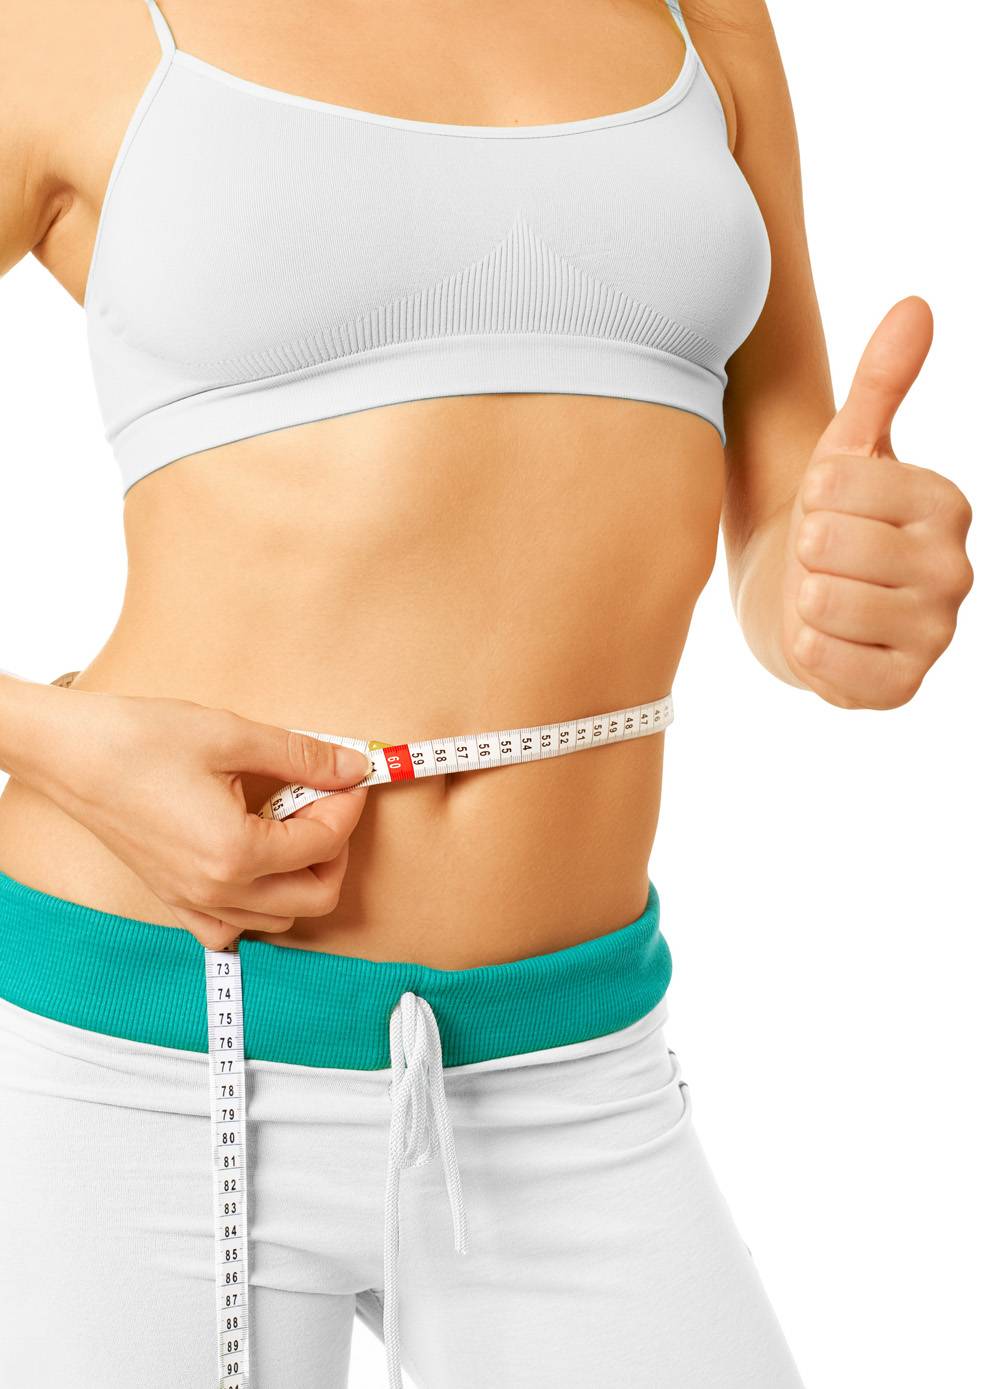 lose weight around your middle by seeing a naturopath for weight loss